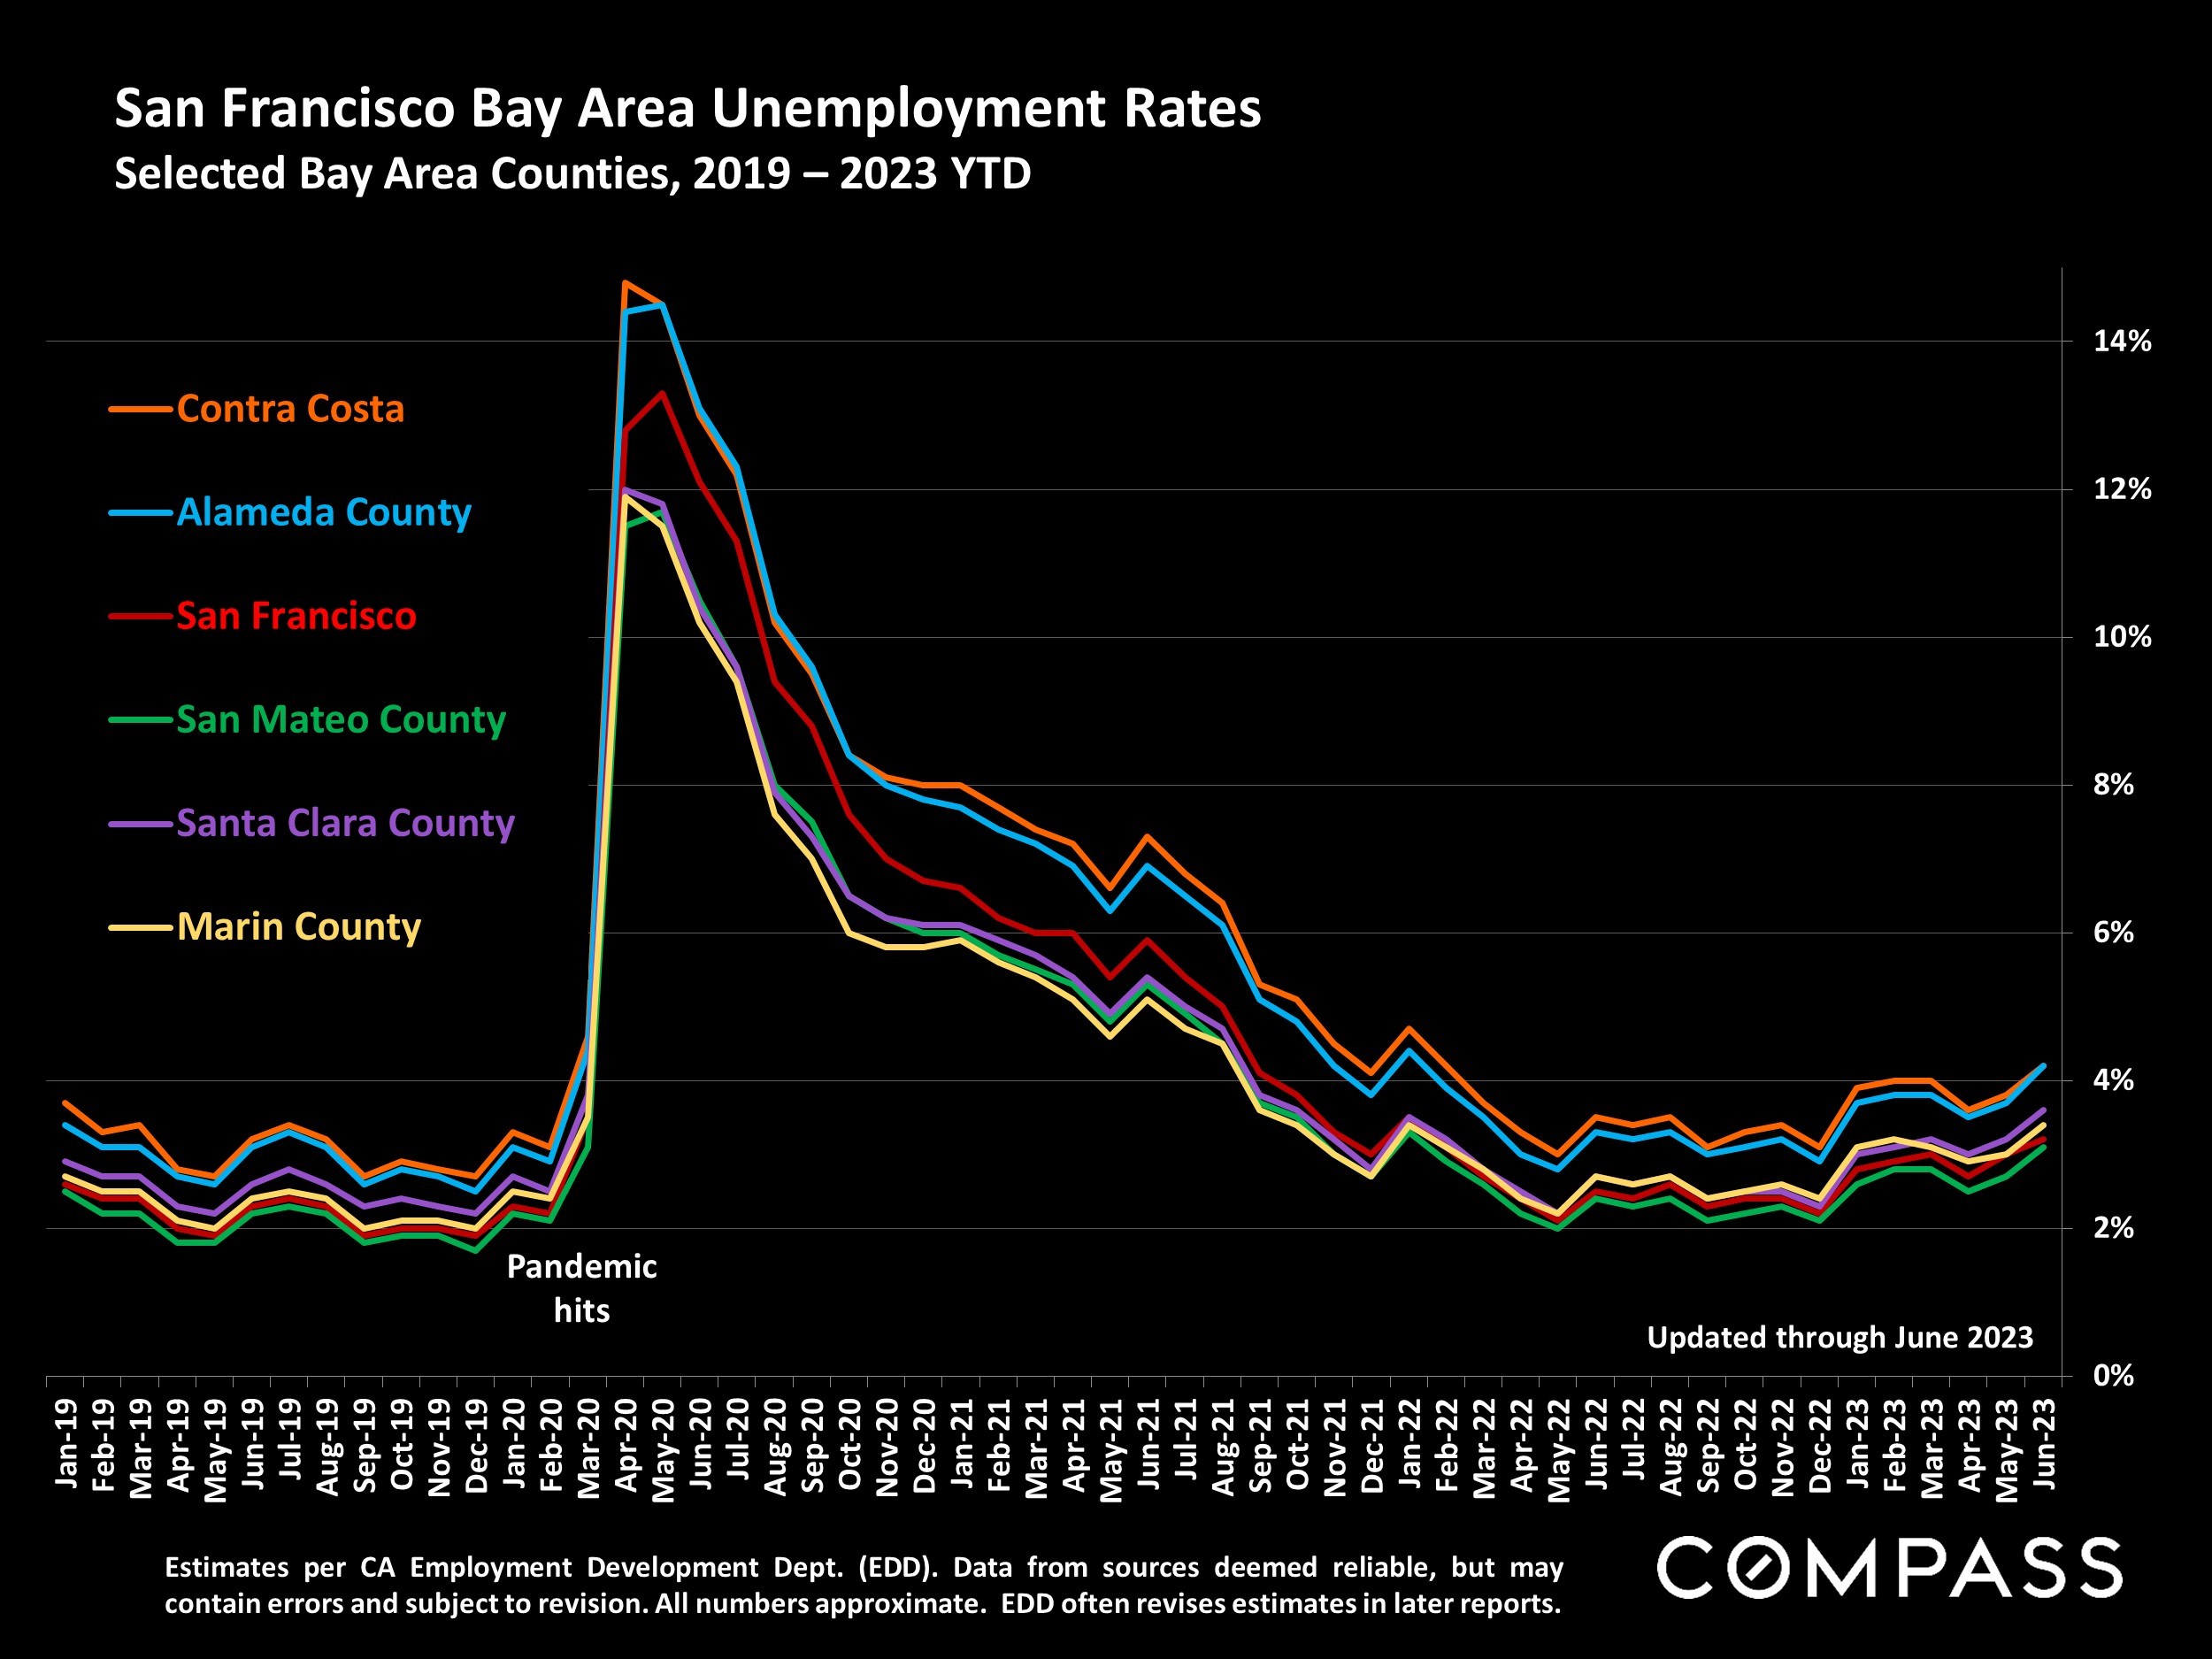 San Francisco Bay Area Unemployment Selected Bay Area Counties, 2019-2023